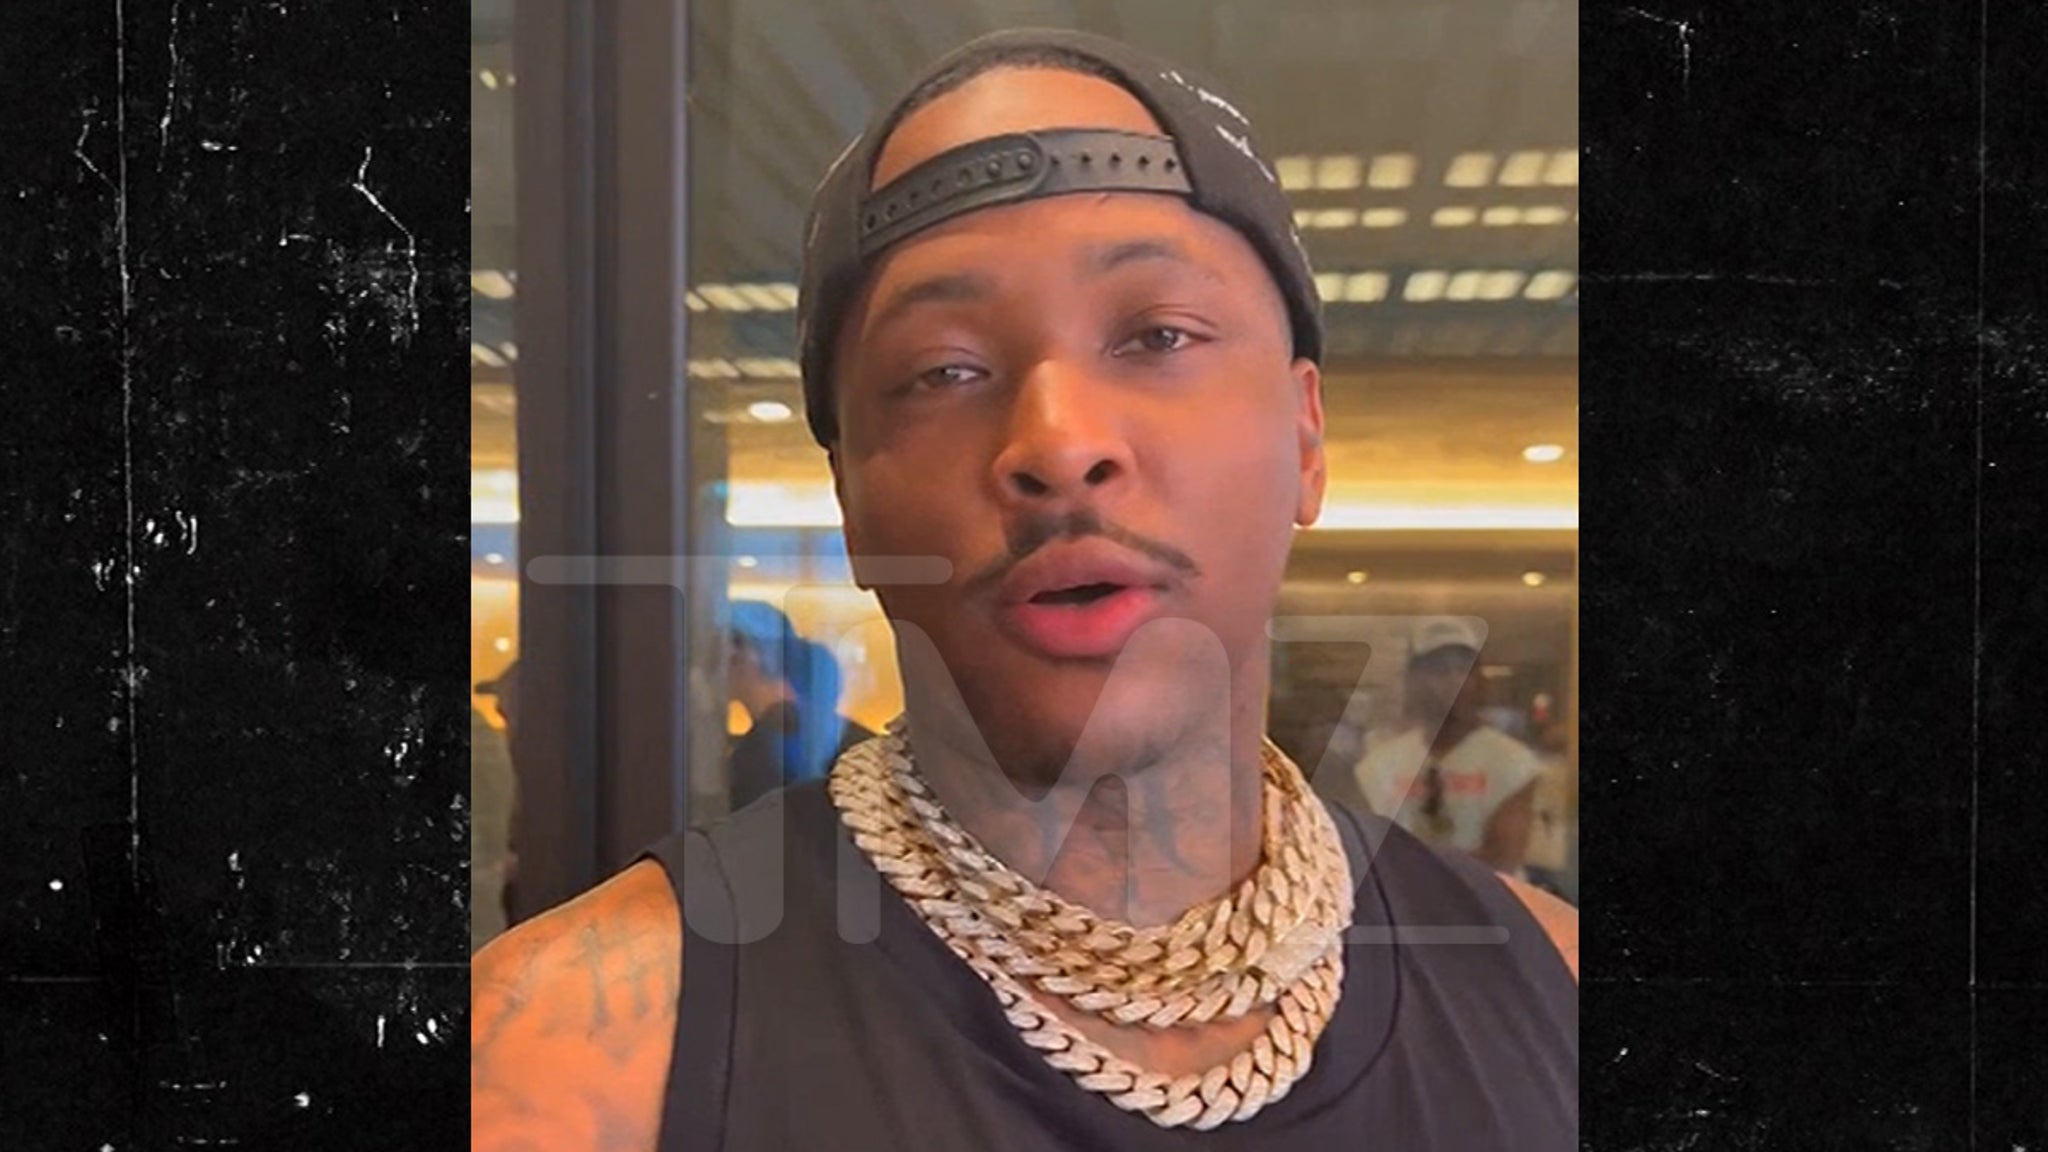 YG salutes Nipsey Hussle's day, wishes the rapper is always with us